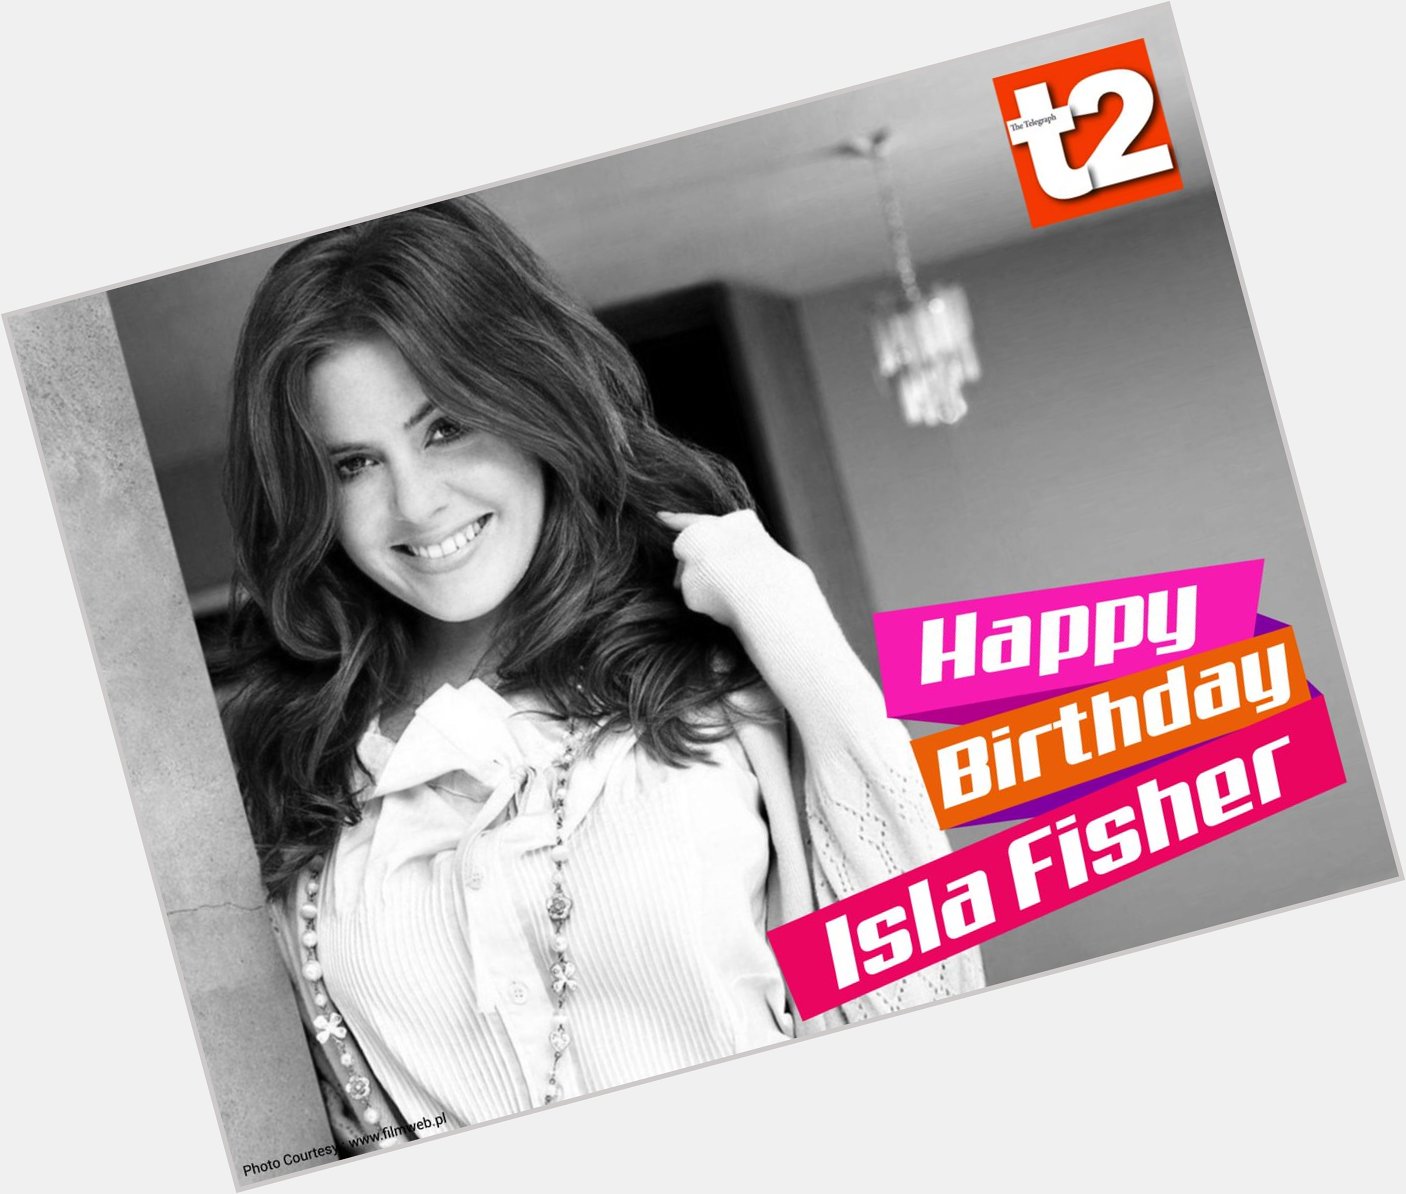 Join us in wishing the delightfully adorable Isla Fisher a very happy birthday! 